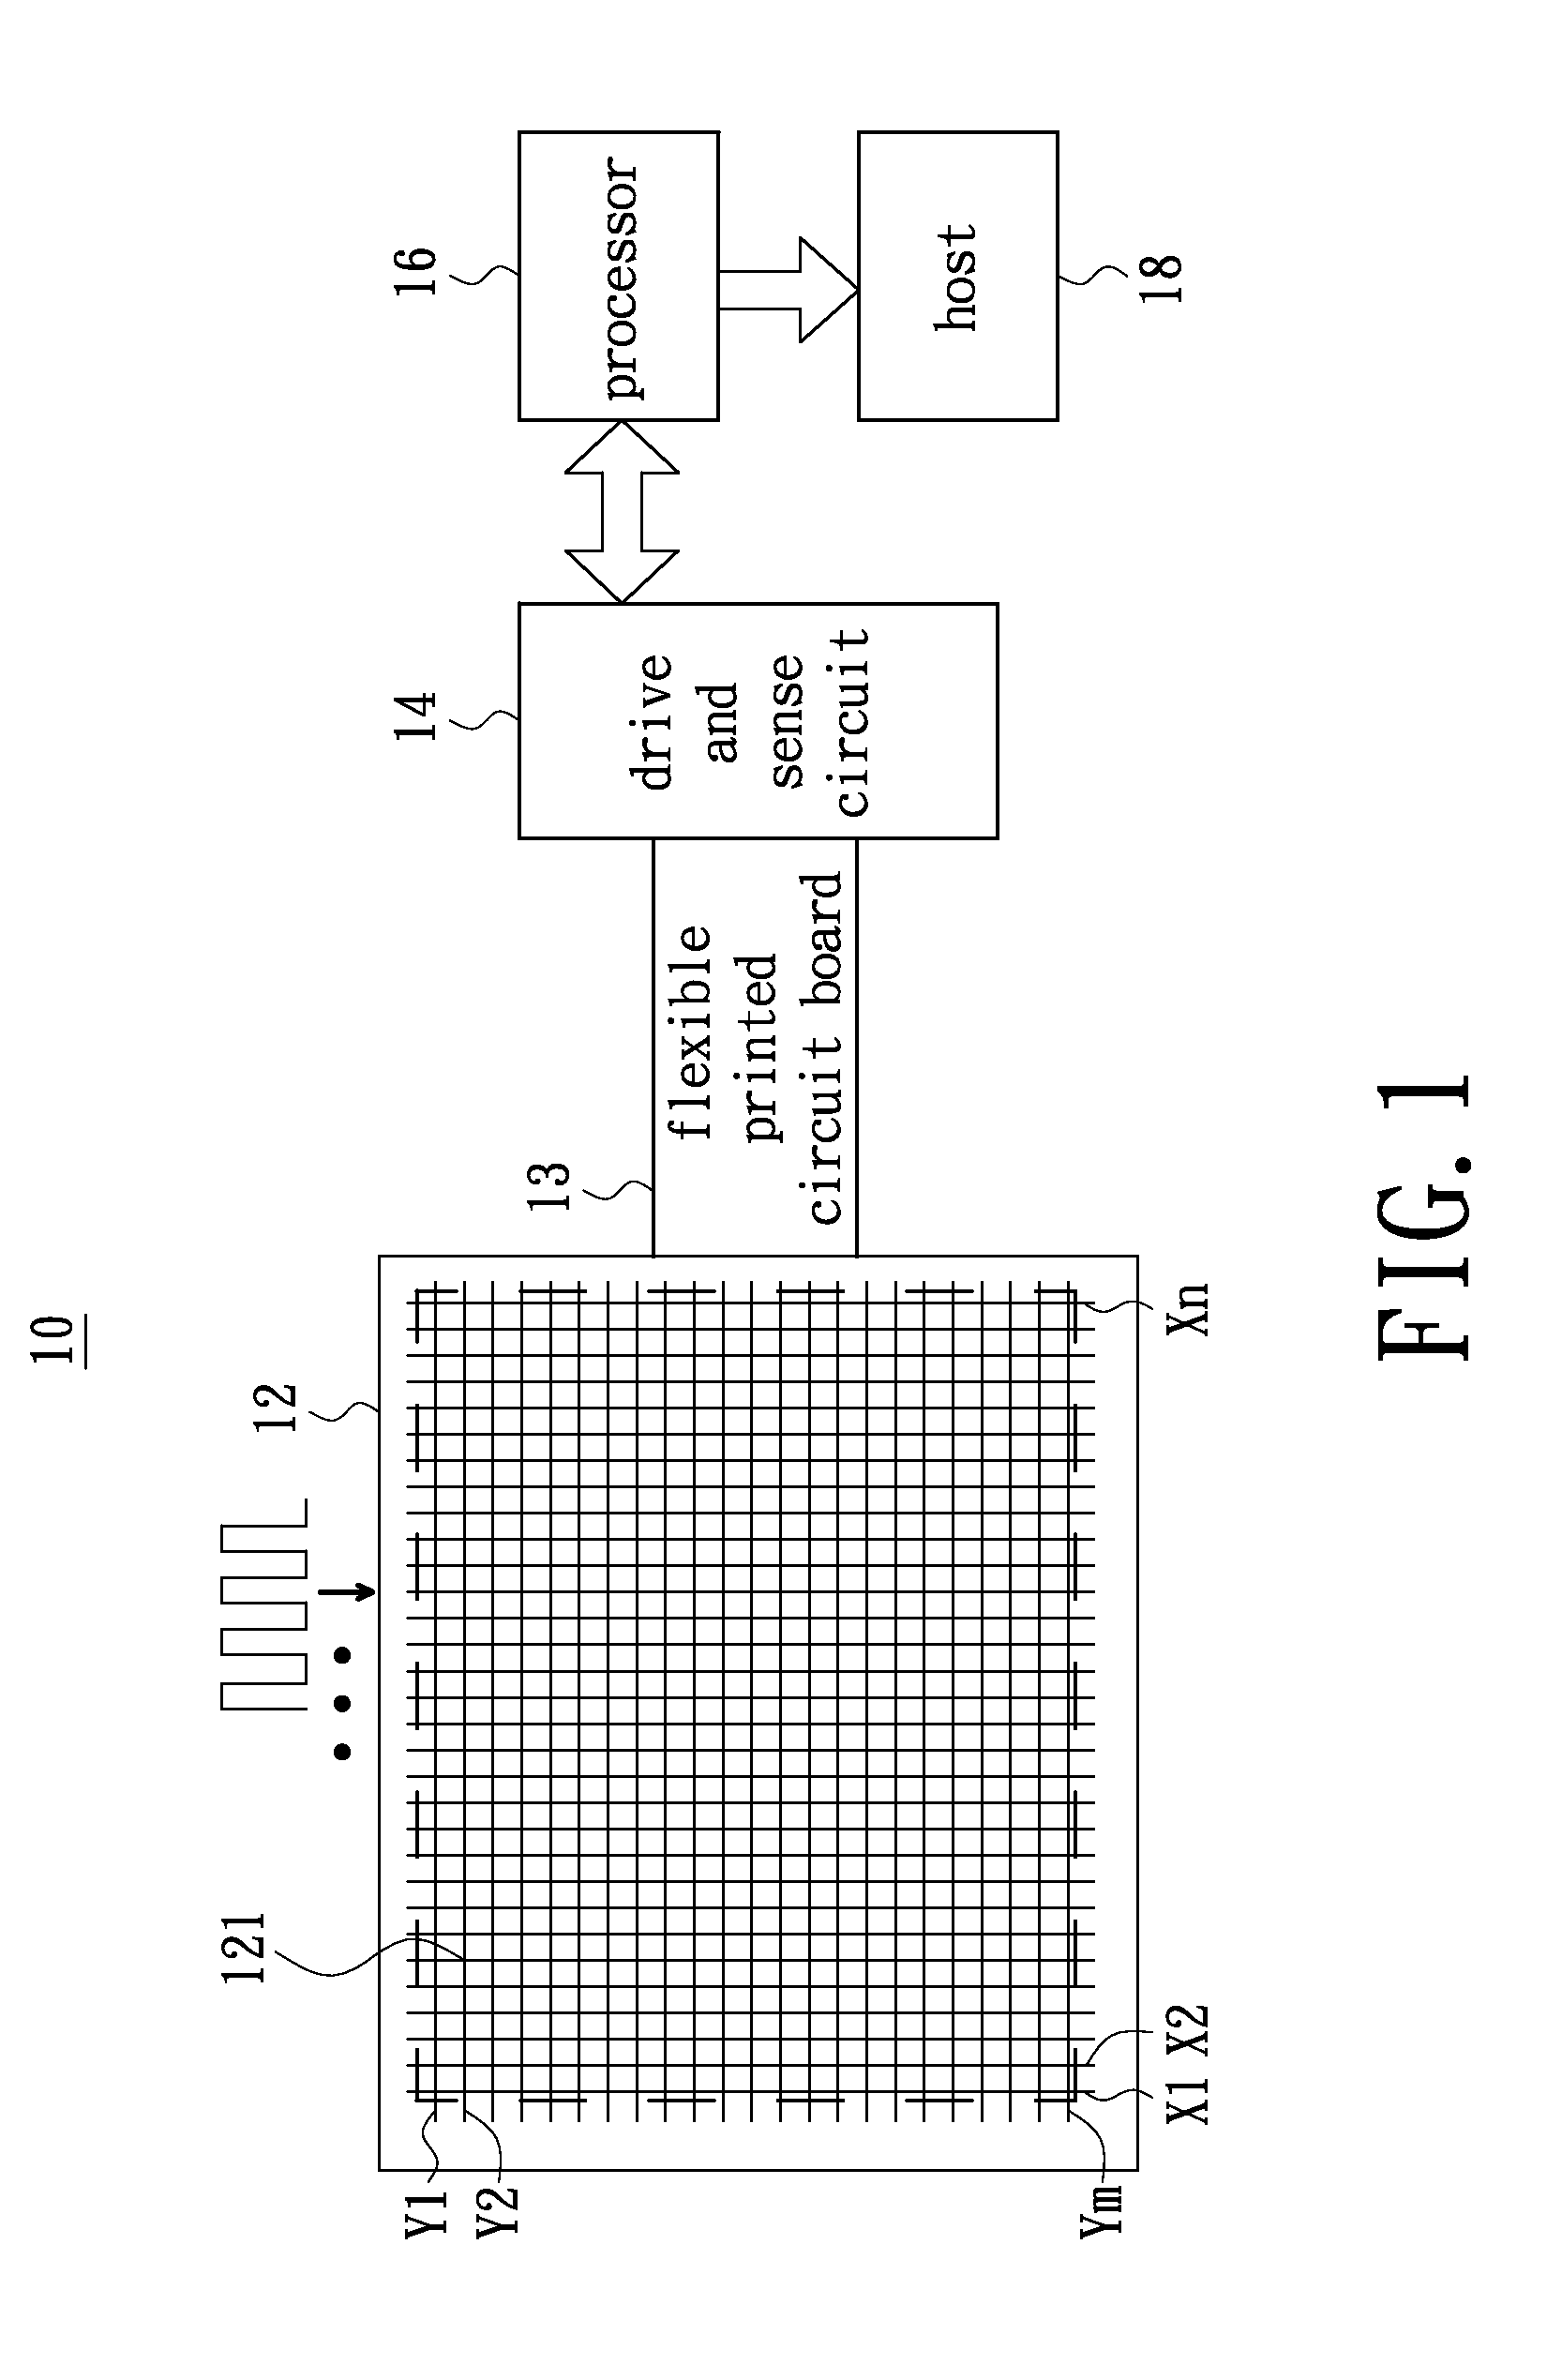 Threshold compensation method on touch device